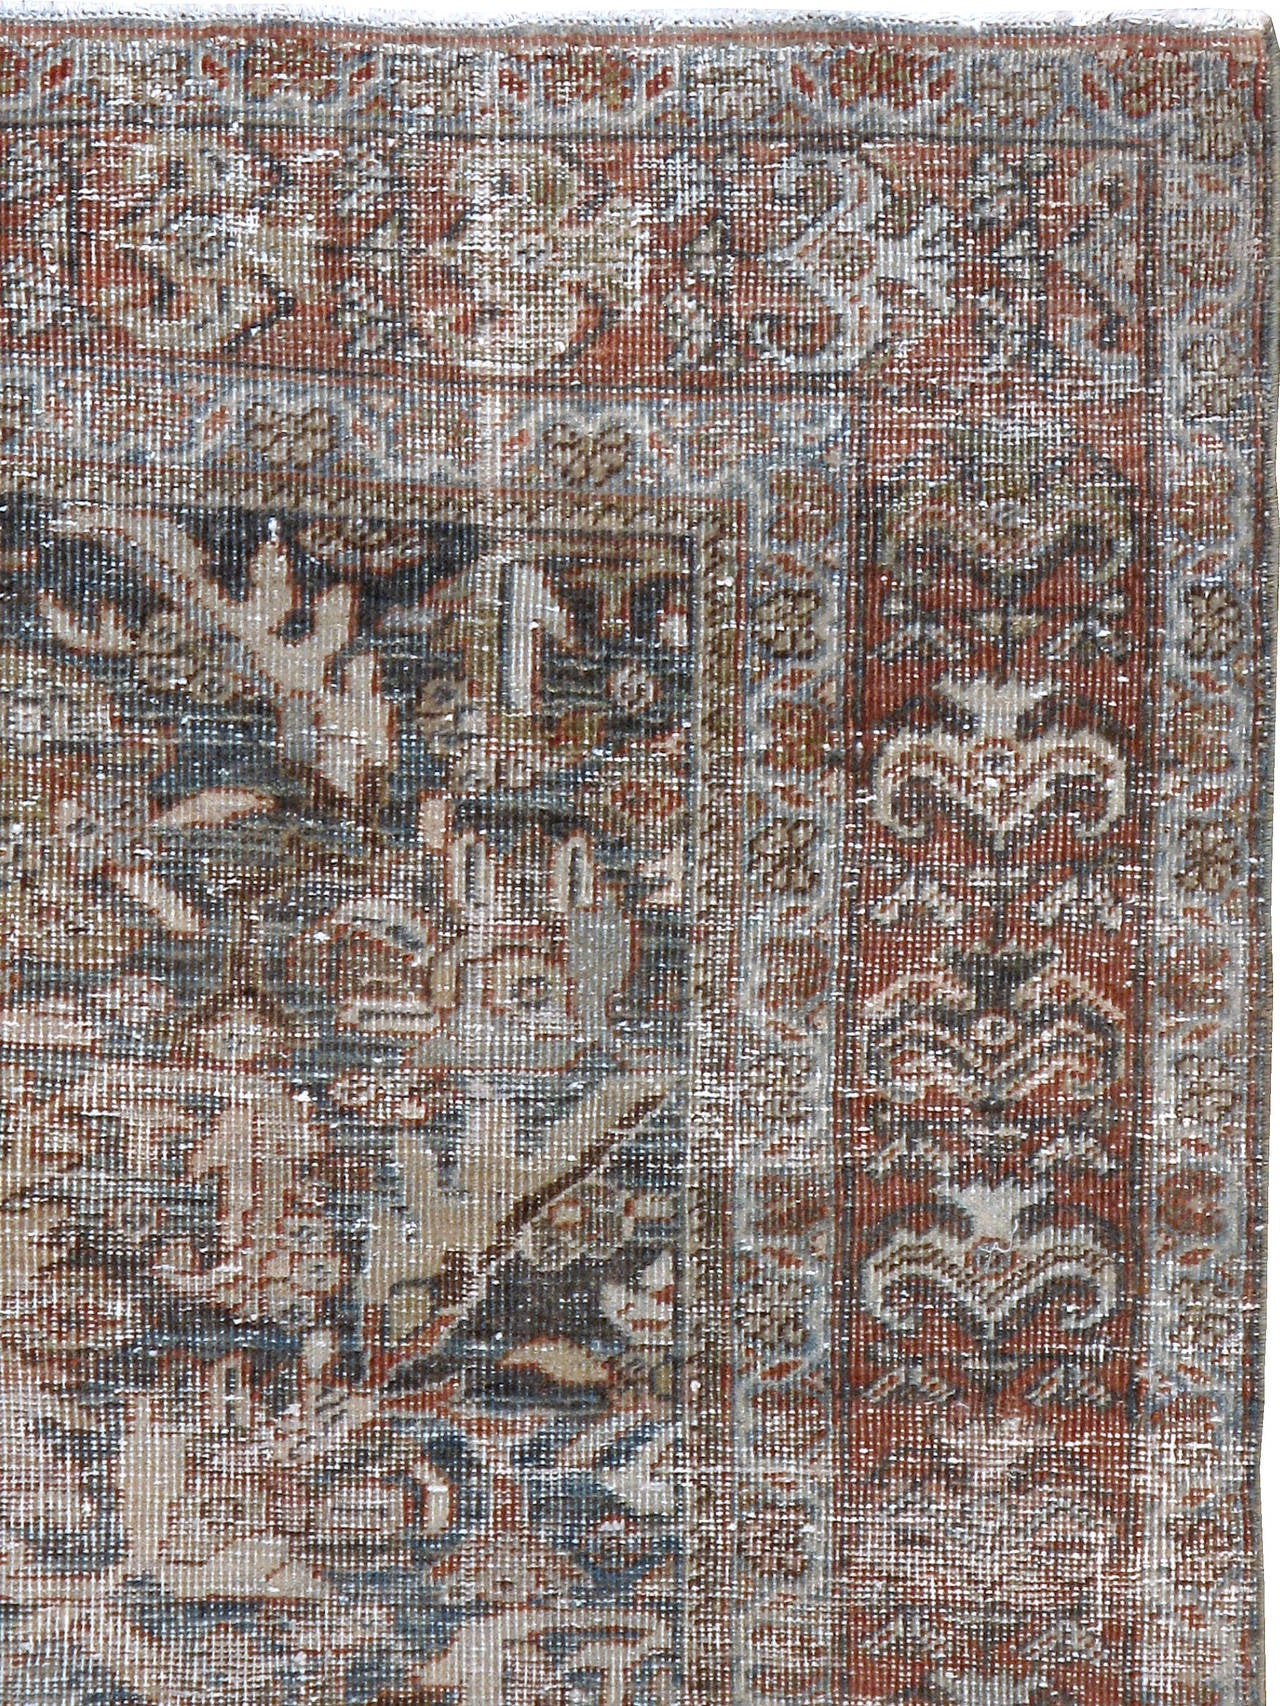 An antique Persian Mahal carpet with a weathered and distressed appeal from the first quarter of the 20th century.